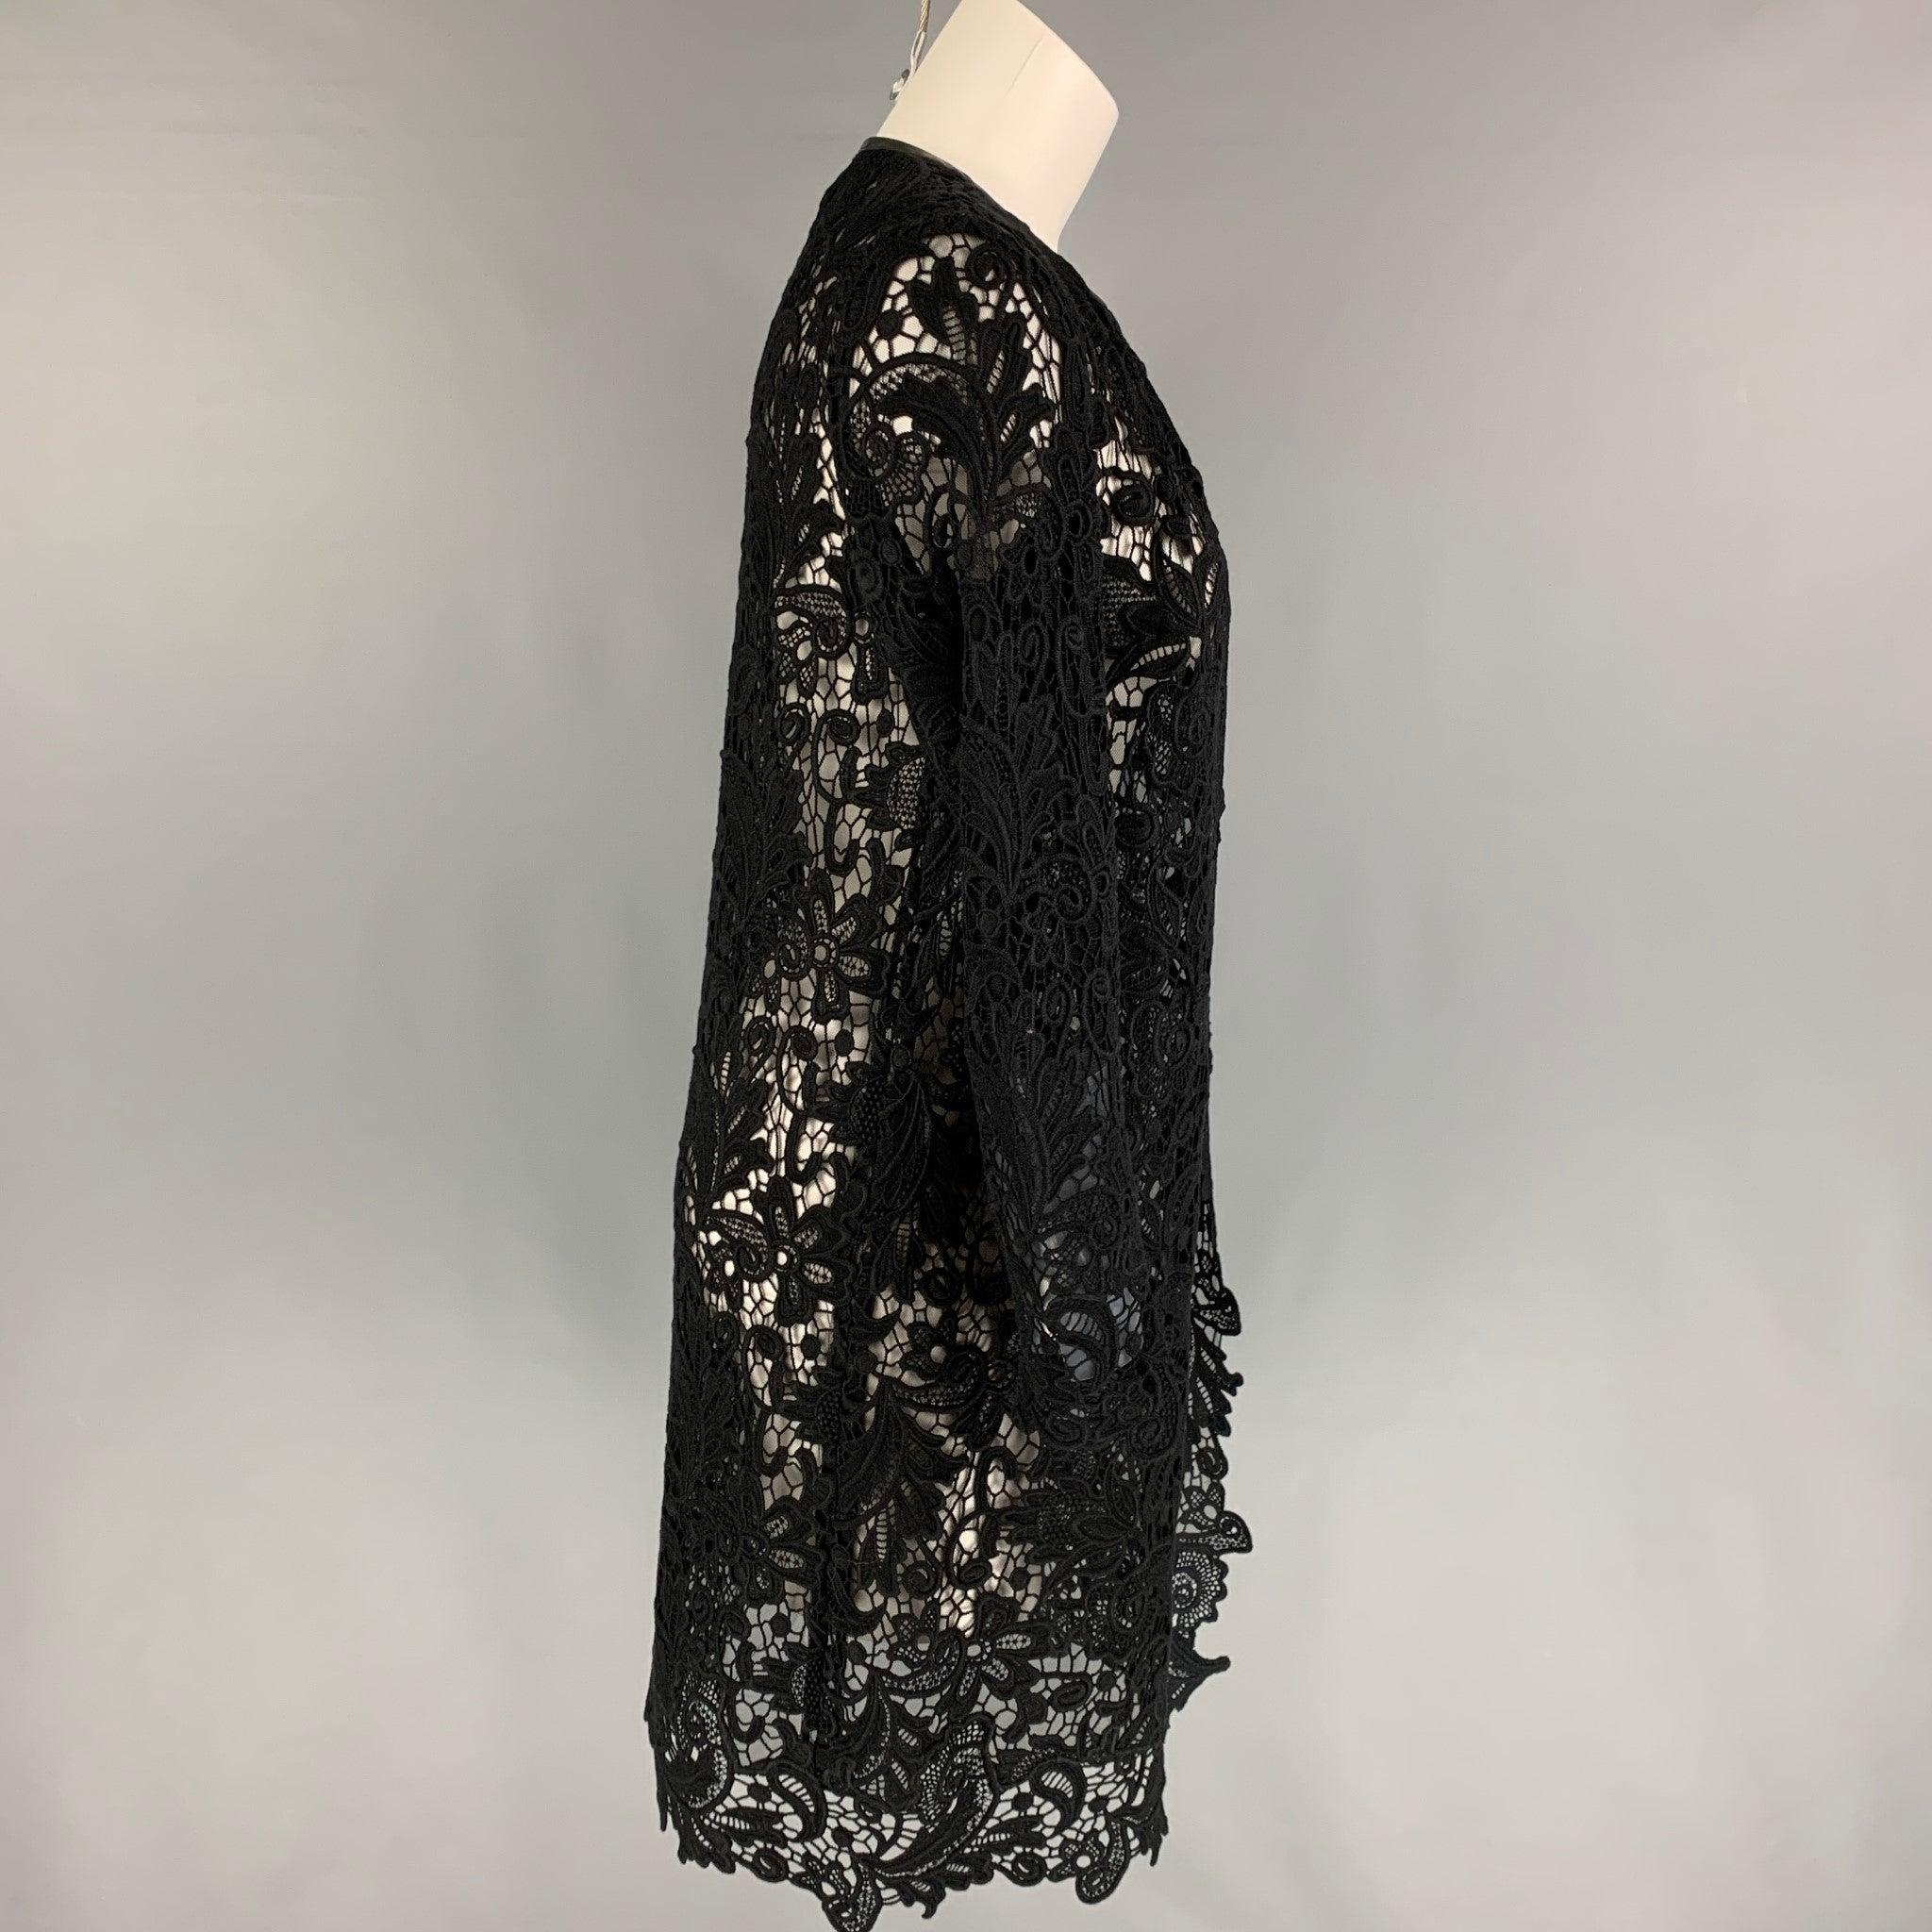 RALPH LAUREN 'Black Label' coat comes in a black lace cotton featuring a leather trim, collarless, and a open front.
Very Good
Pre-Owned Condition. 

Marked:   4 

Measurements: 
 
Shoulder: 15 inches  Bust: 34 inches  Sleeve: 24 inches  Length: